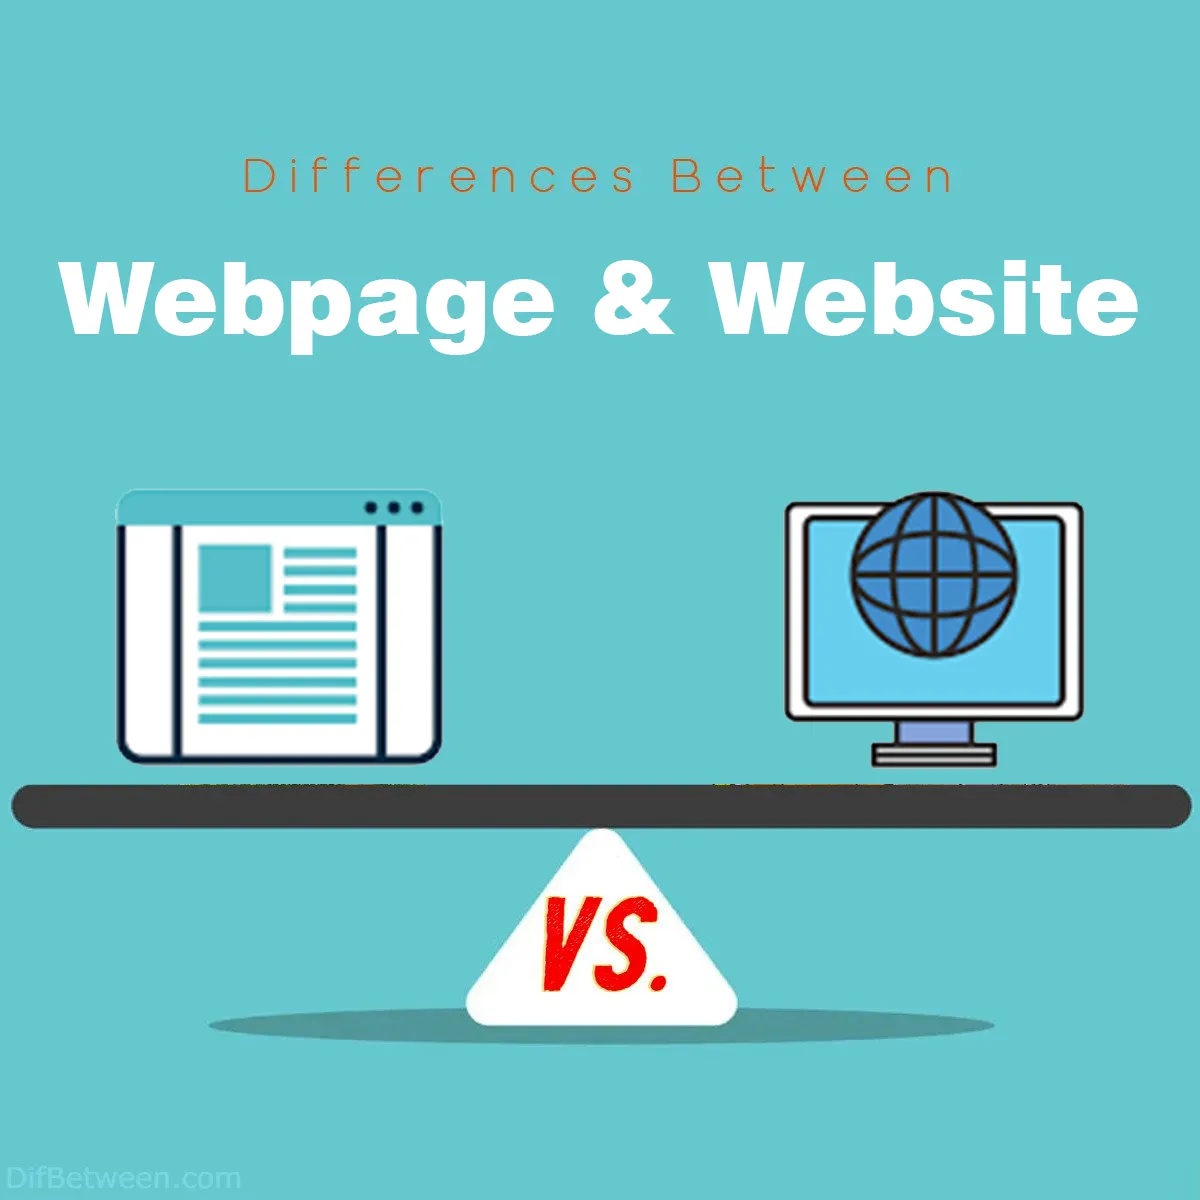 Differences Between Webpage and Website